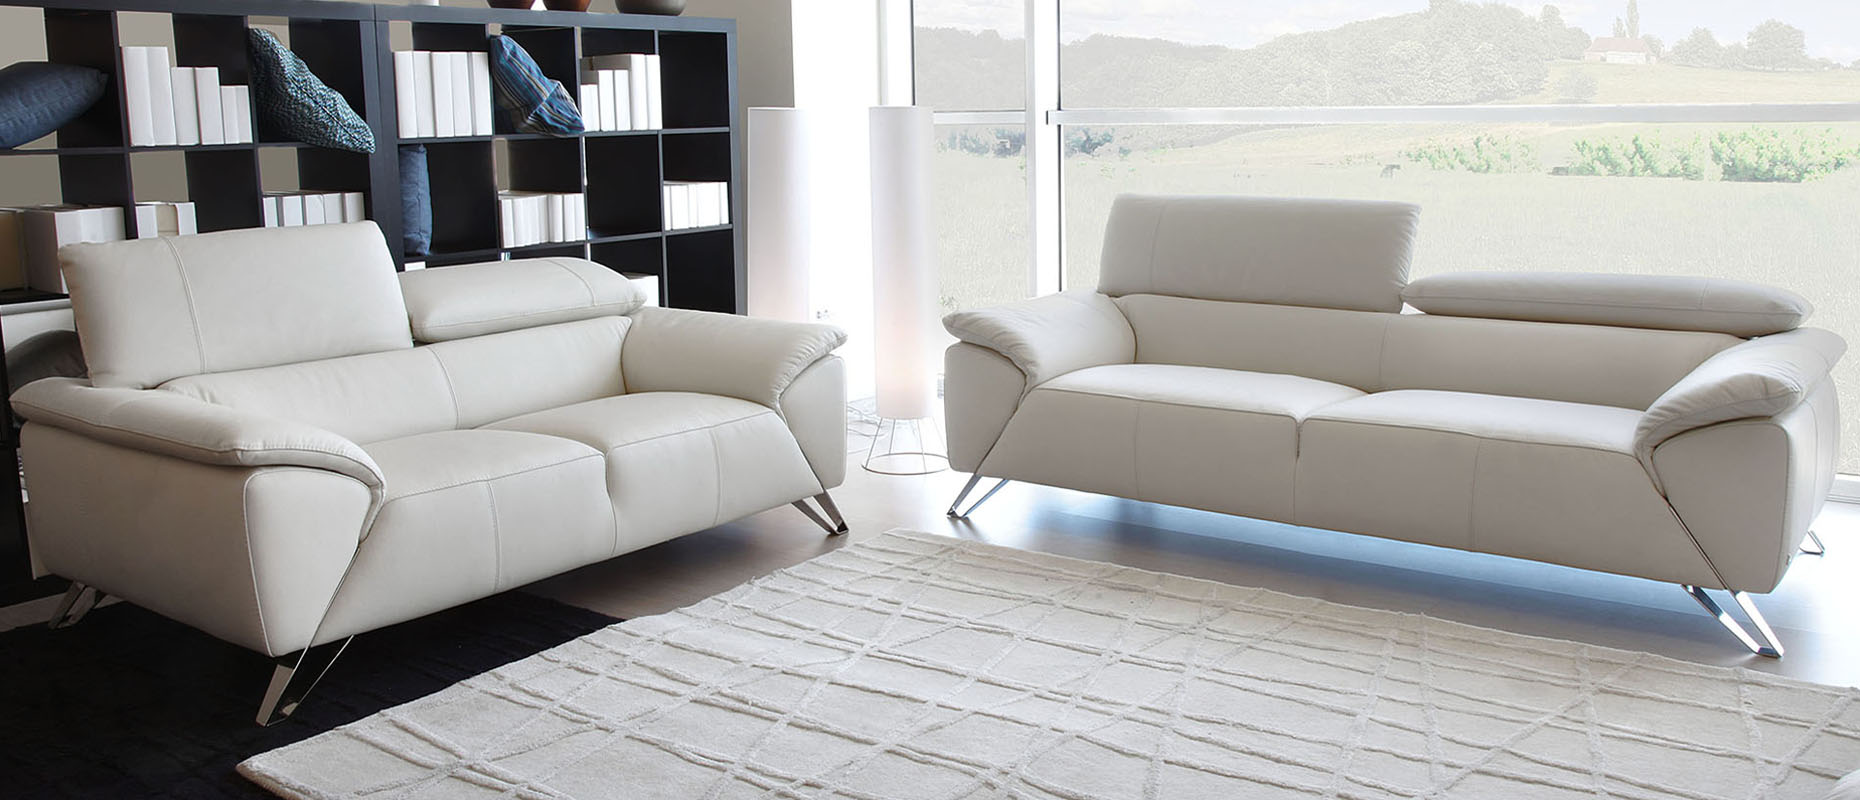 Puccini Sofa Collection | Forrest Furnishing Glasgow's finest furniture ...